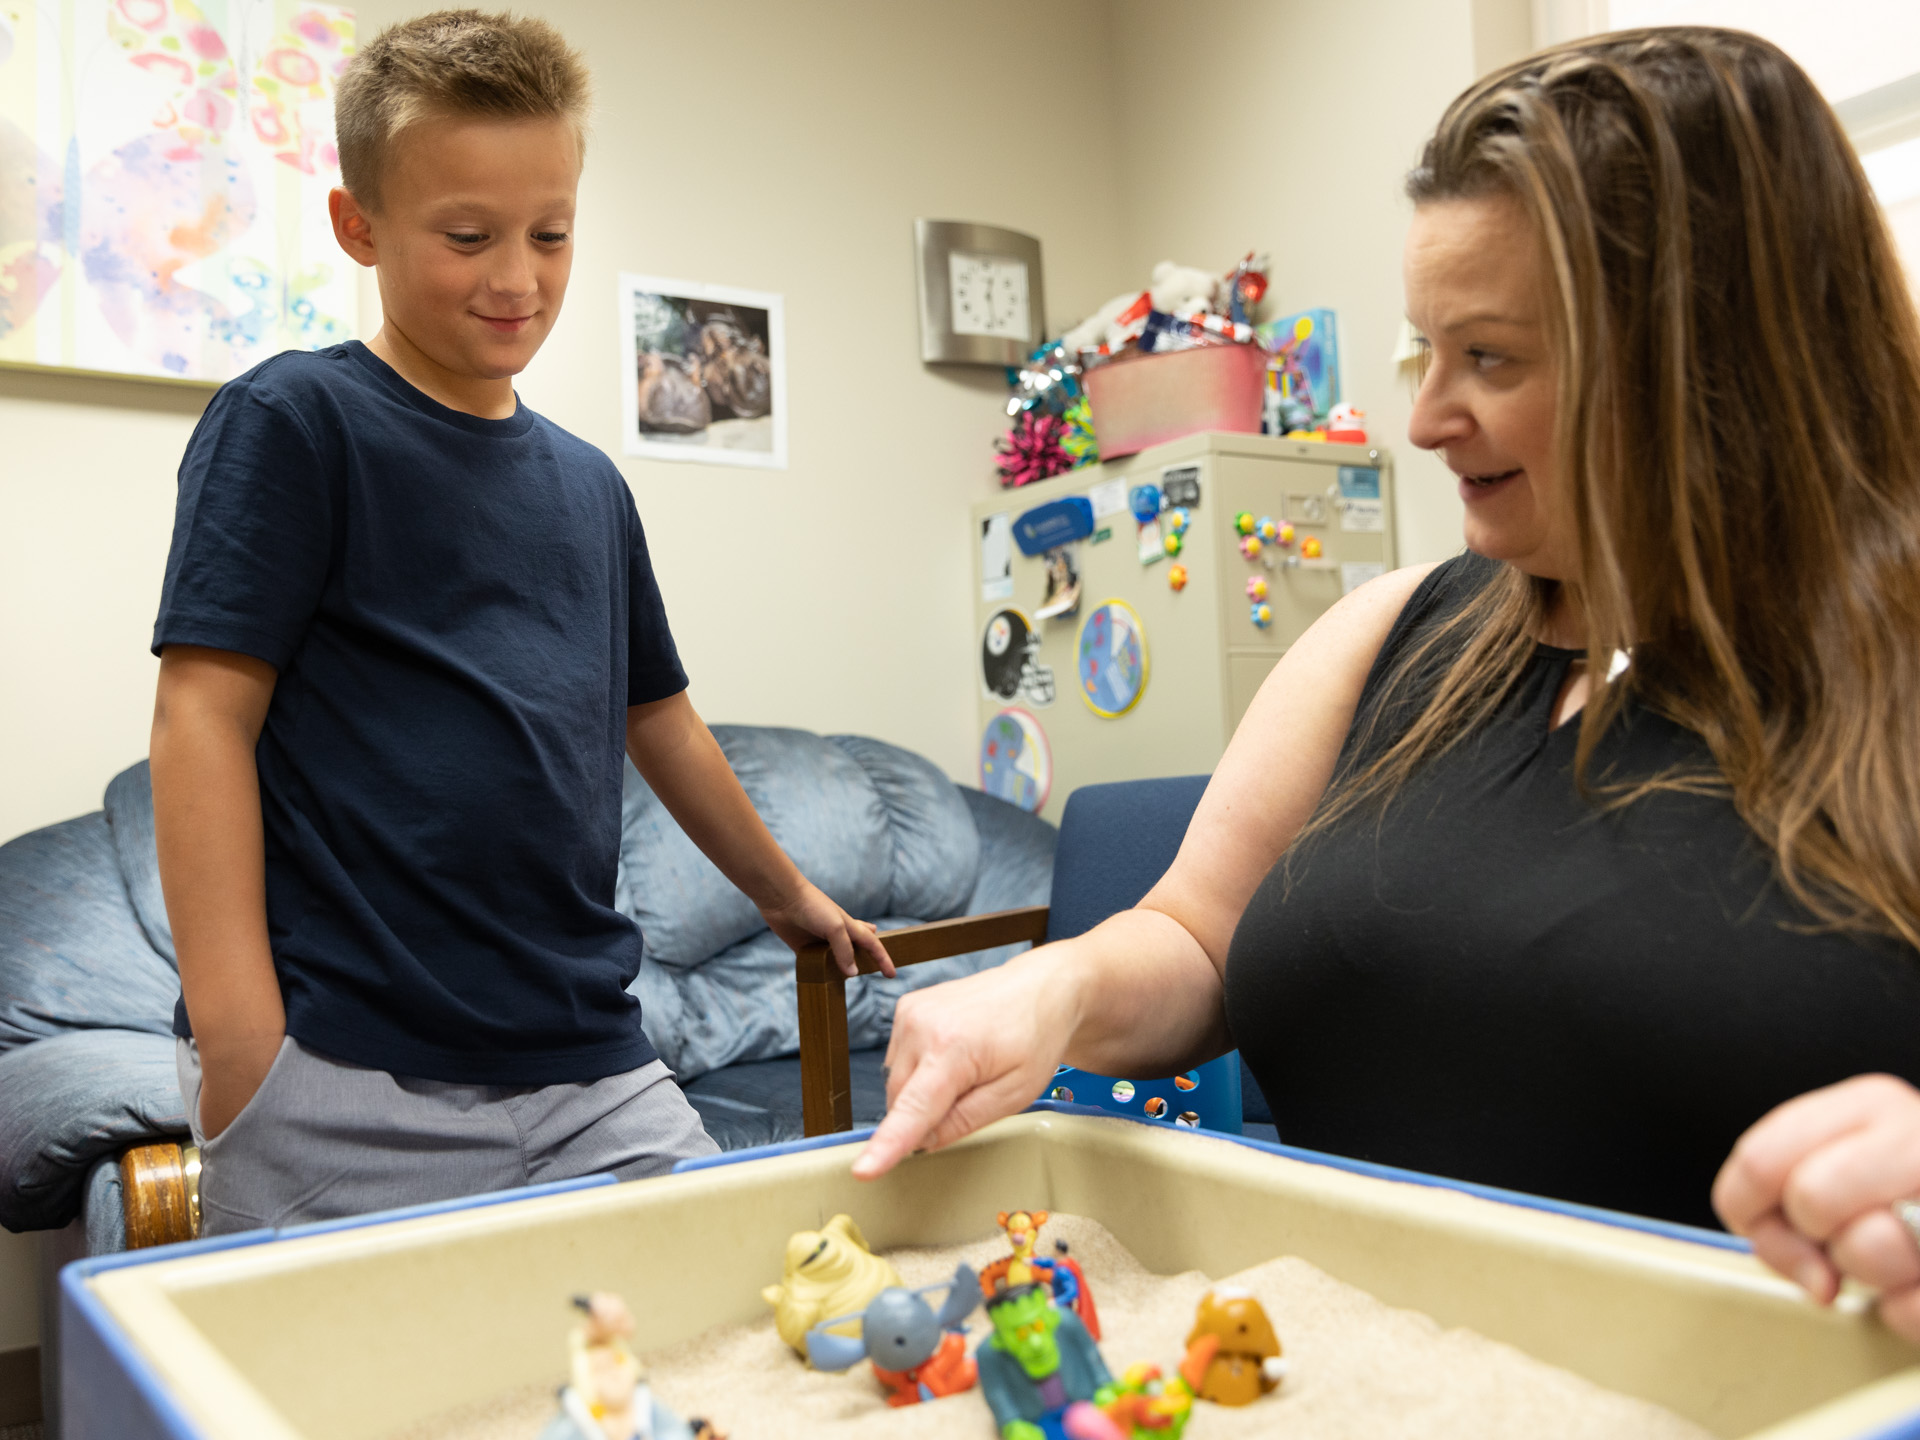 A talking woman points to a toy inside an indoor sandbox to a grinning young boy.